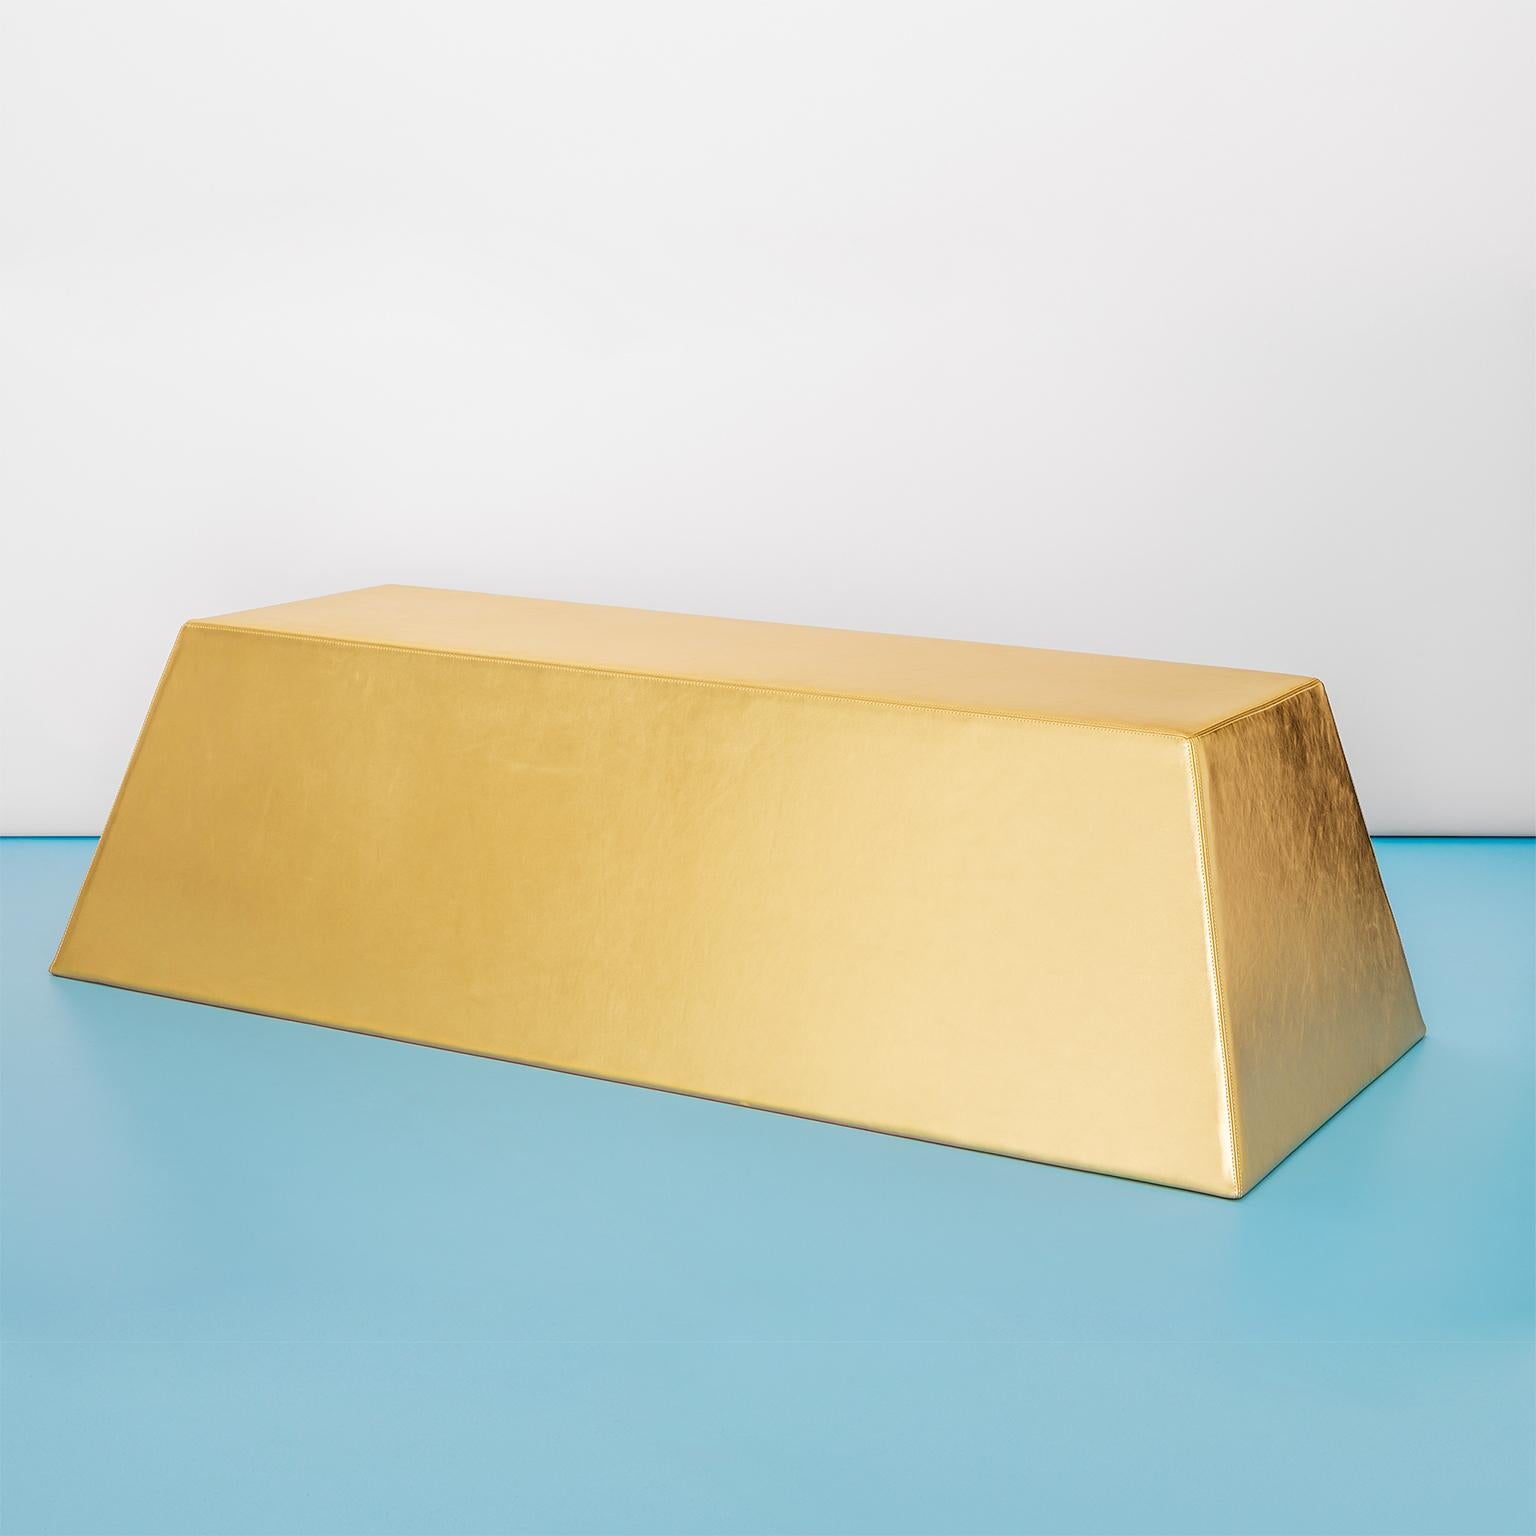 Hand-Crafted Lingottone Soft Gold Bench, Atelier Biagetti